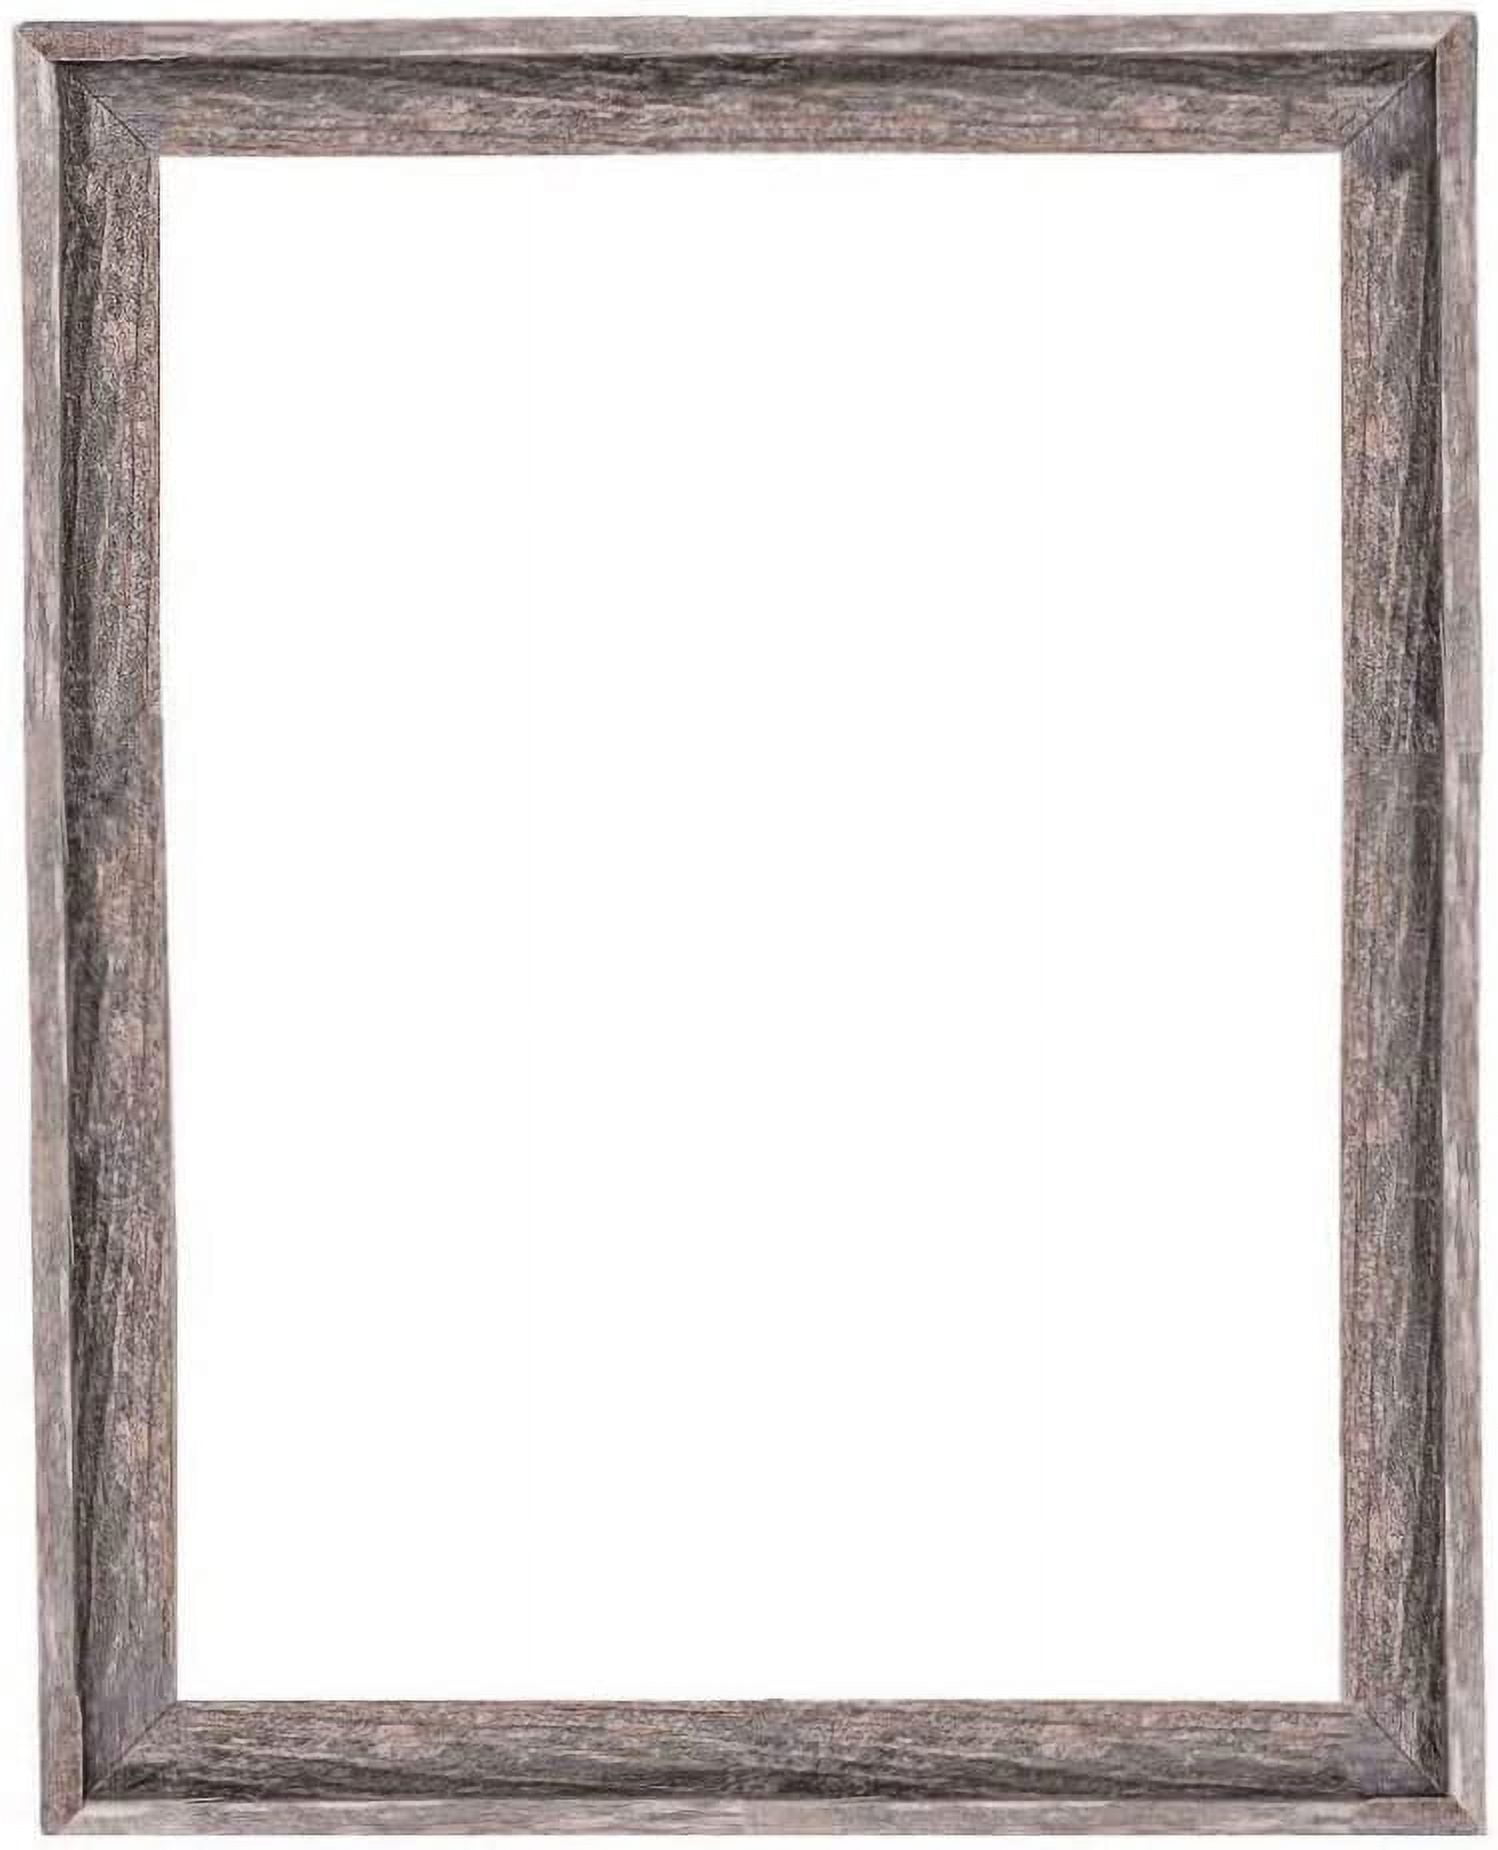 Barnwood Frame  Reclaimed Wood Frame with Barbed Wire Accent, 24x30